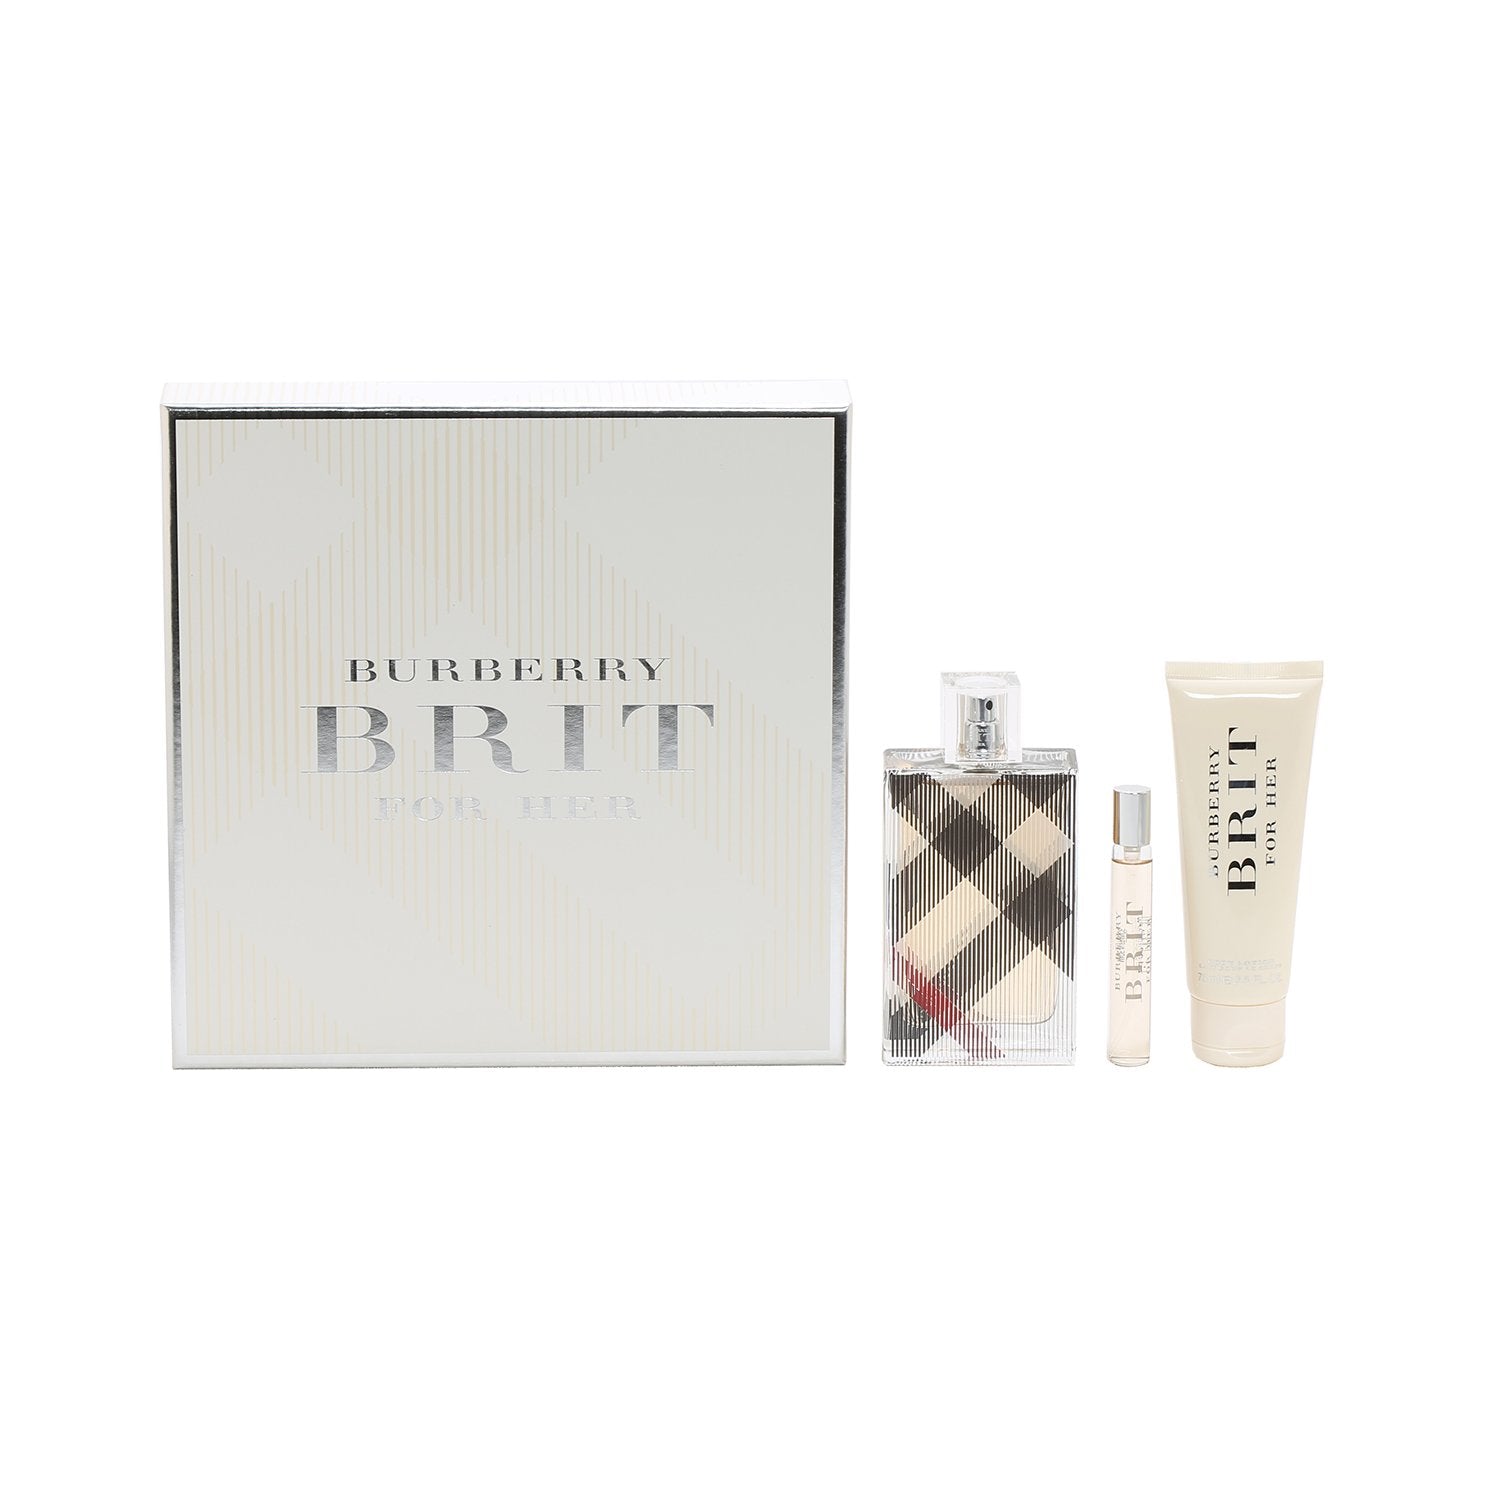 Perfume Sets - BURBERRY BRIT FOR WOMEN - GIFT SET